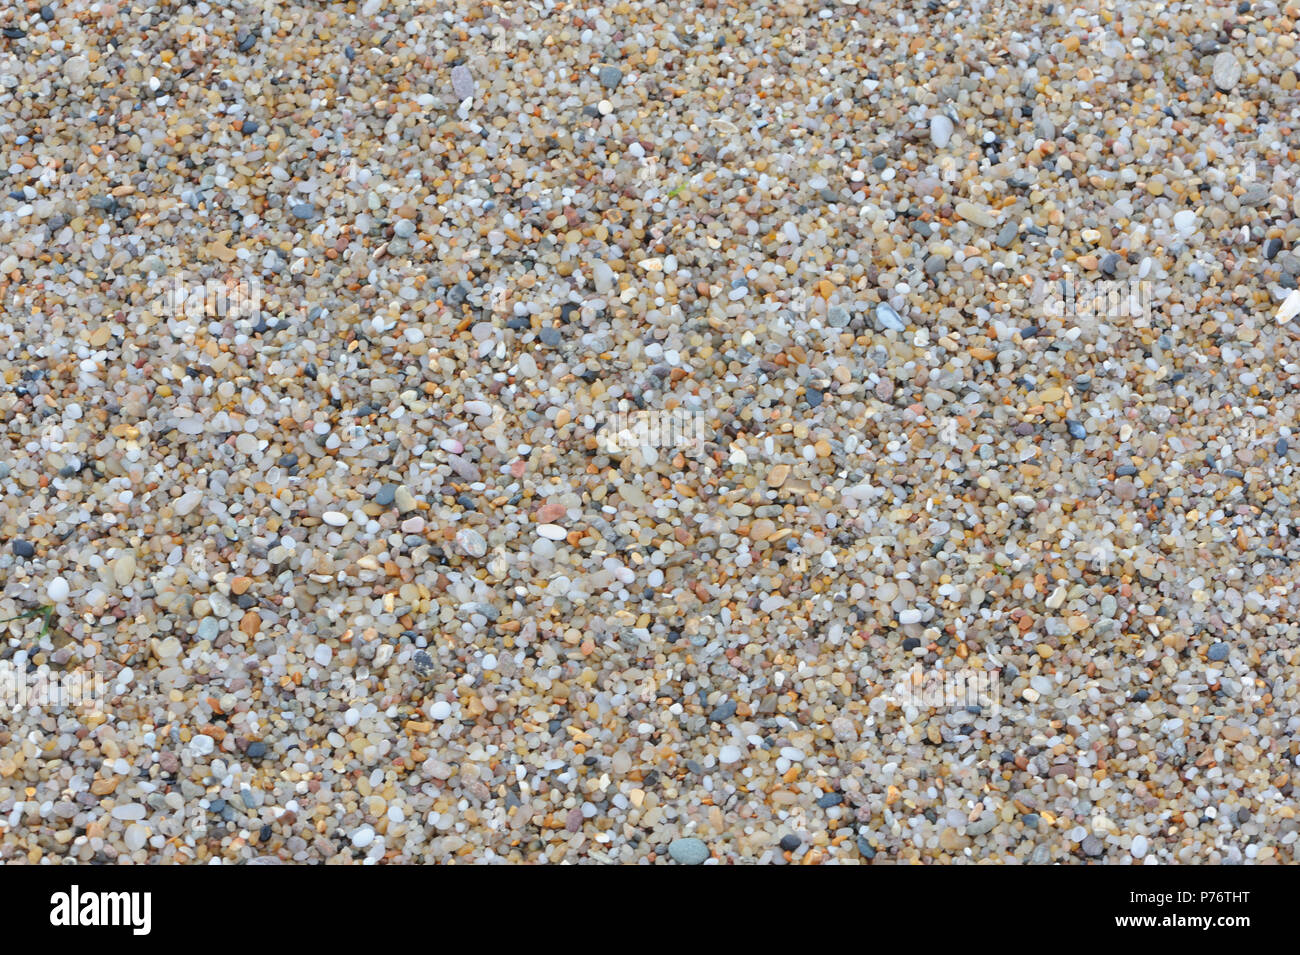 Very coarse sand or very small shingle made up of tiny pebbles on the beach at Ballycastle. Ballycastle, Antrim, Northern Ireland. Stock Photo